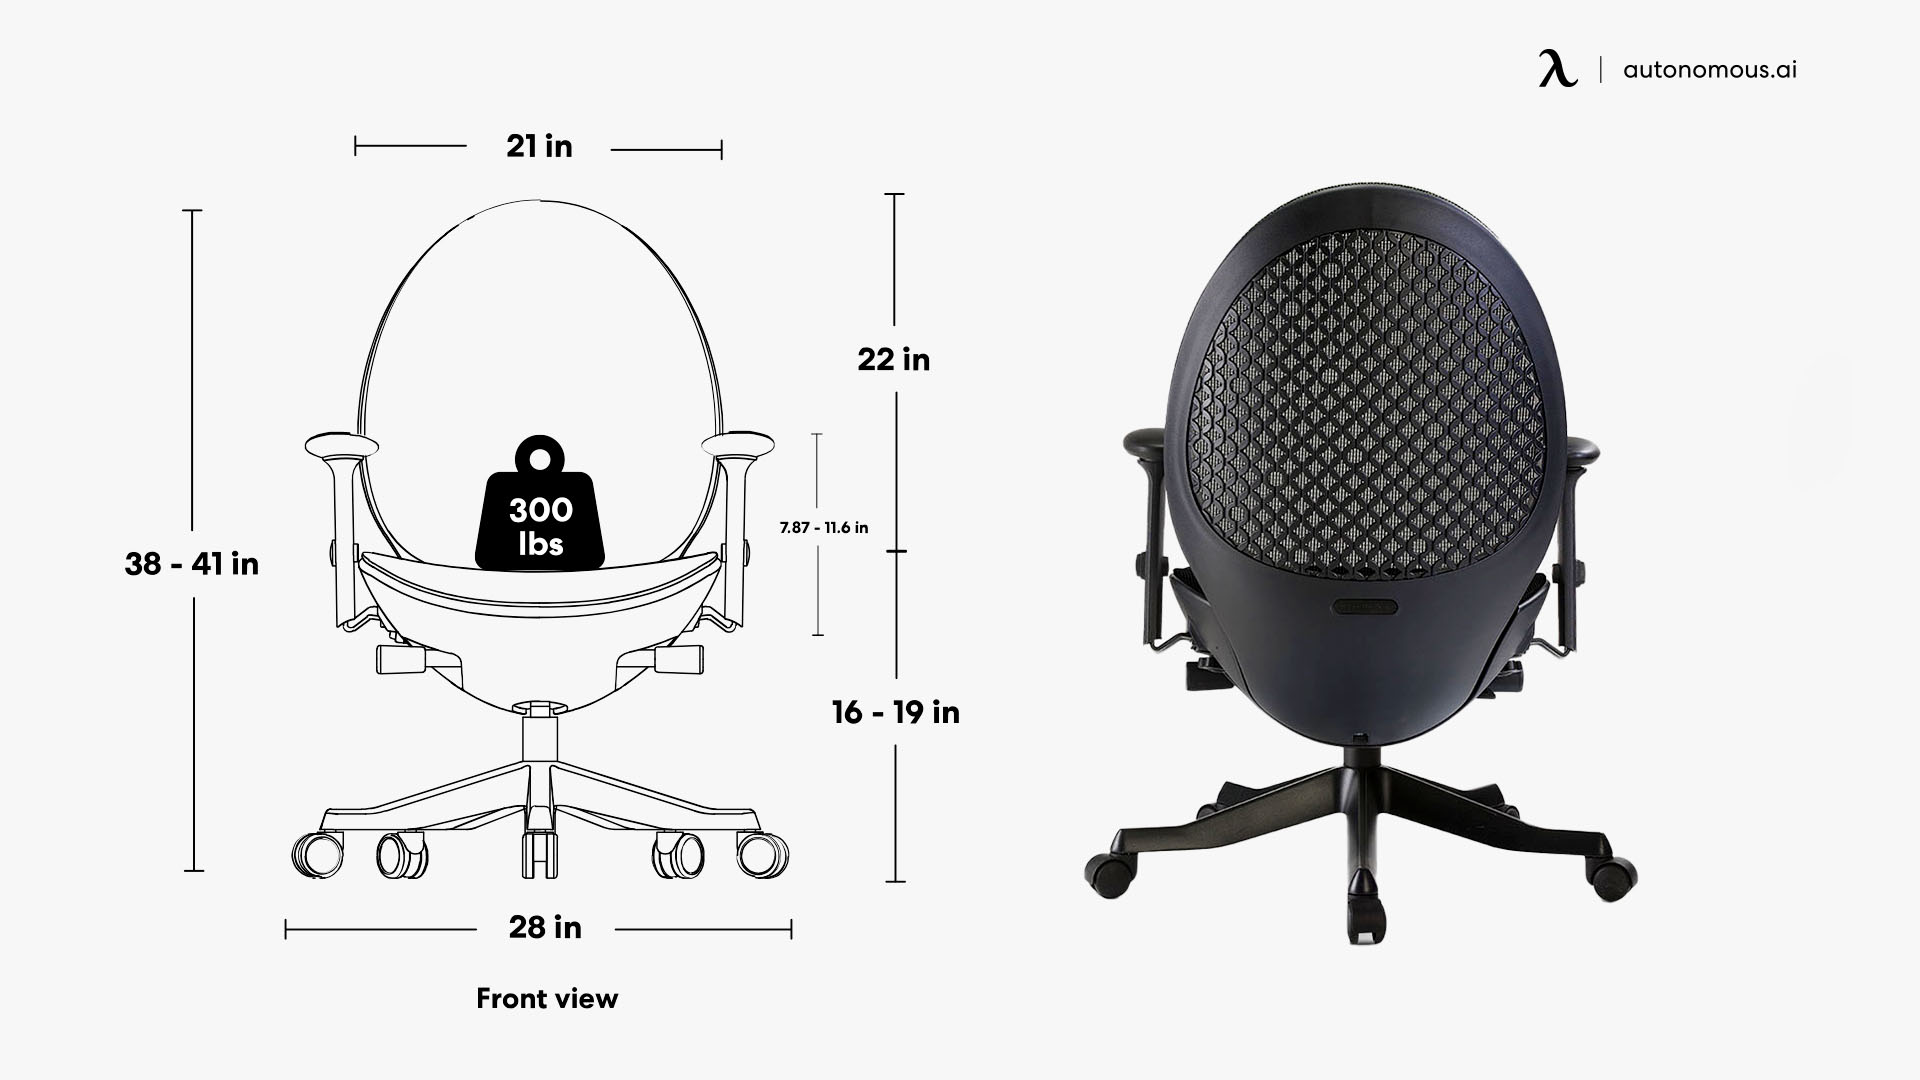 Standard Chair Dimensions for Small People